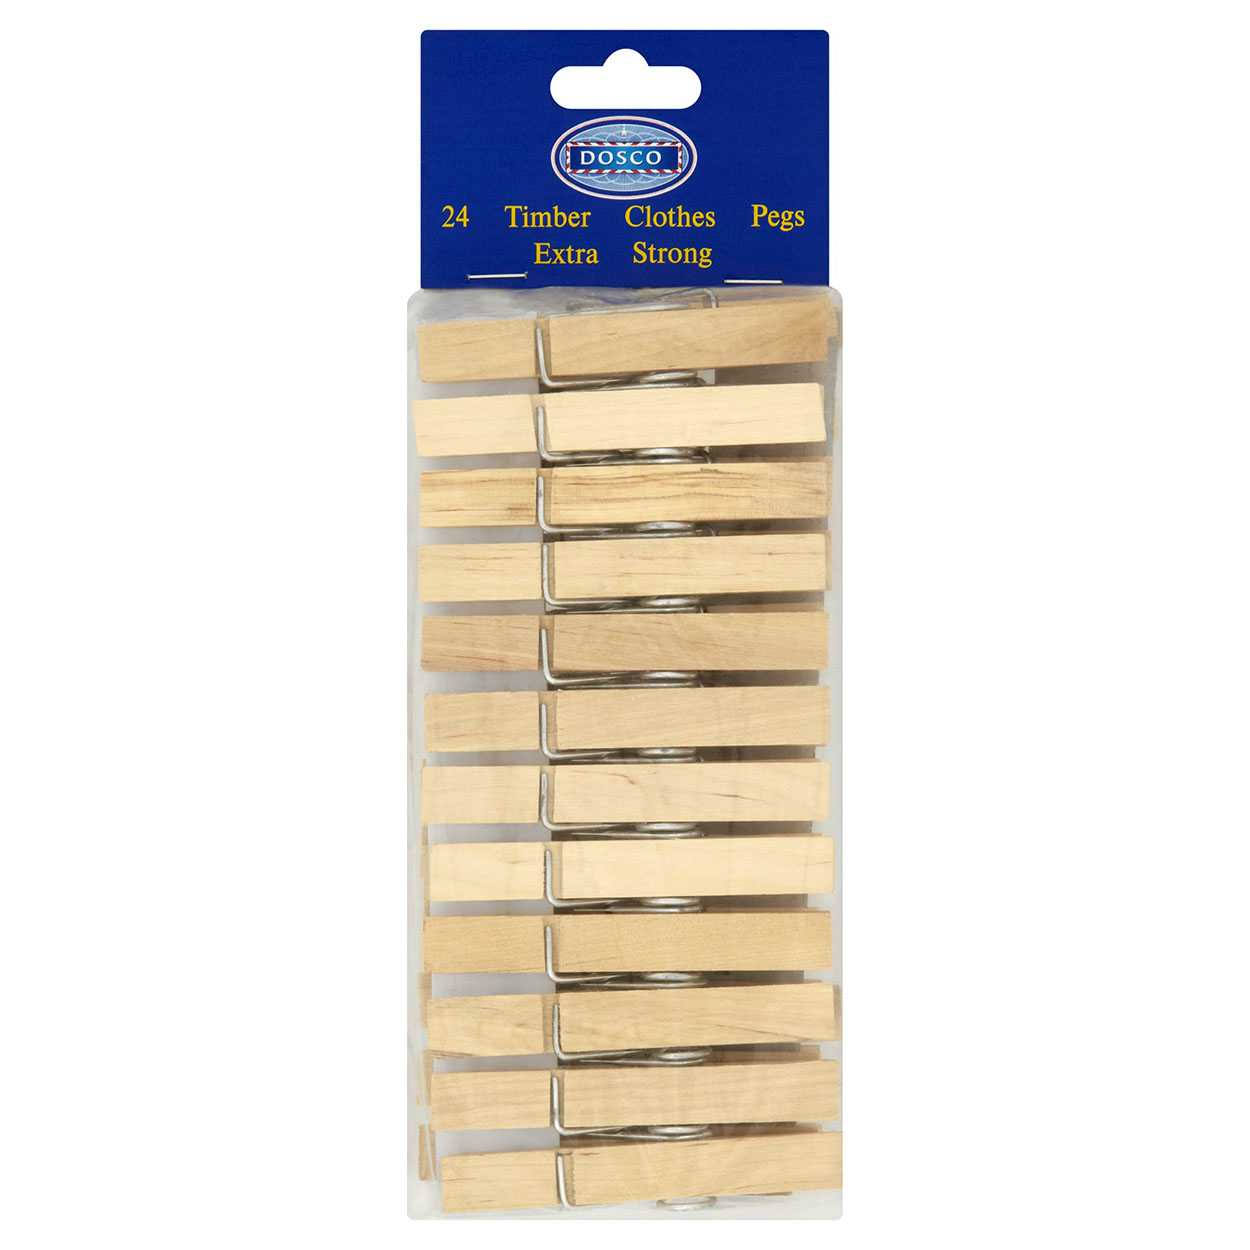 Dosco Timber Clothes Pegs - Extra Strong, 24 Pack